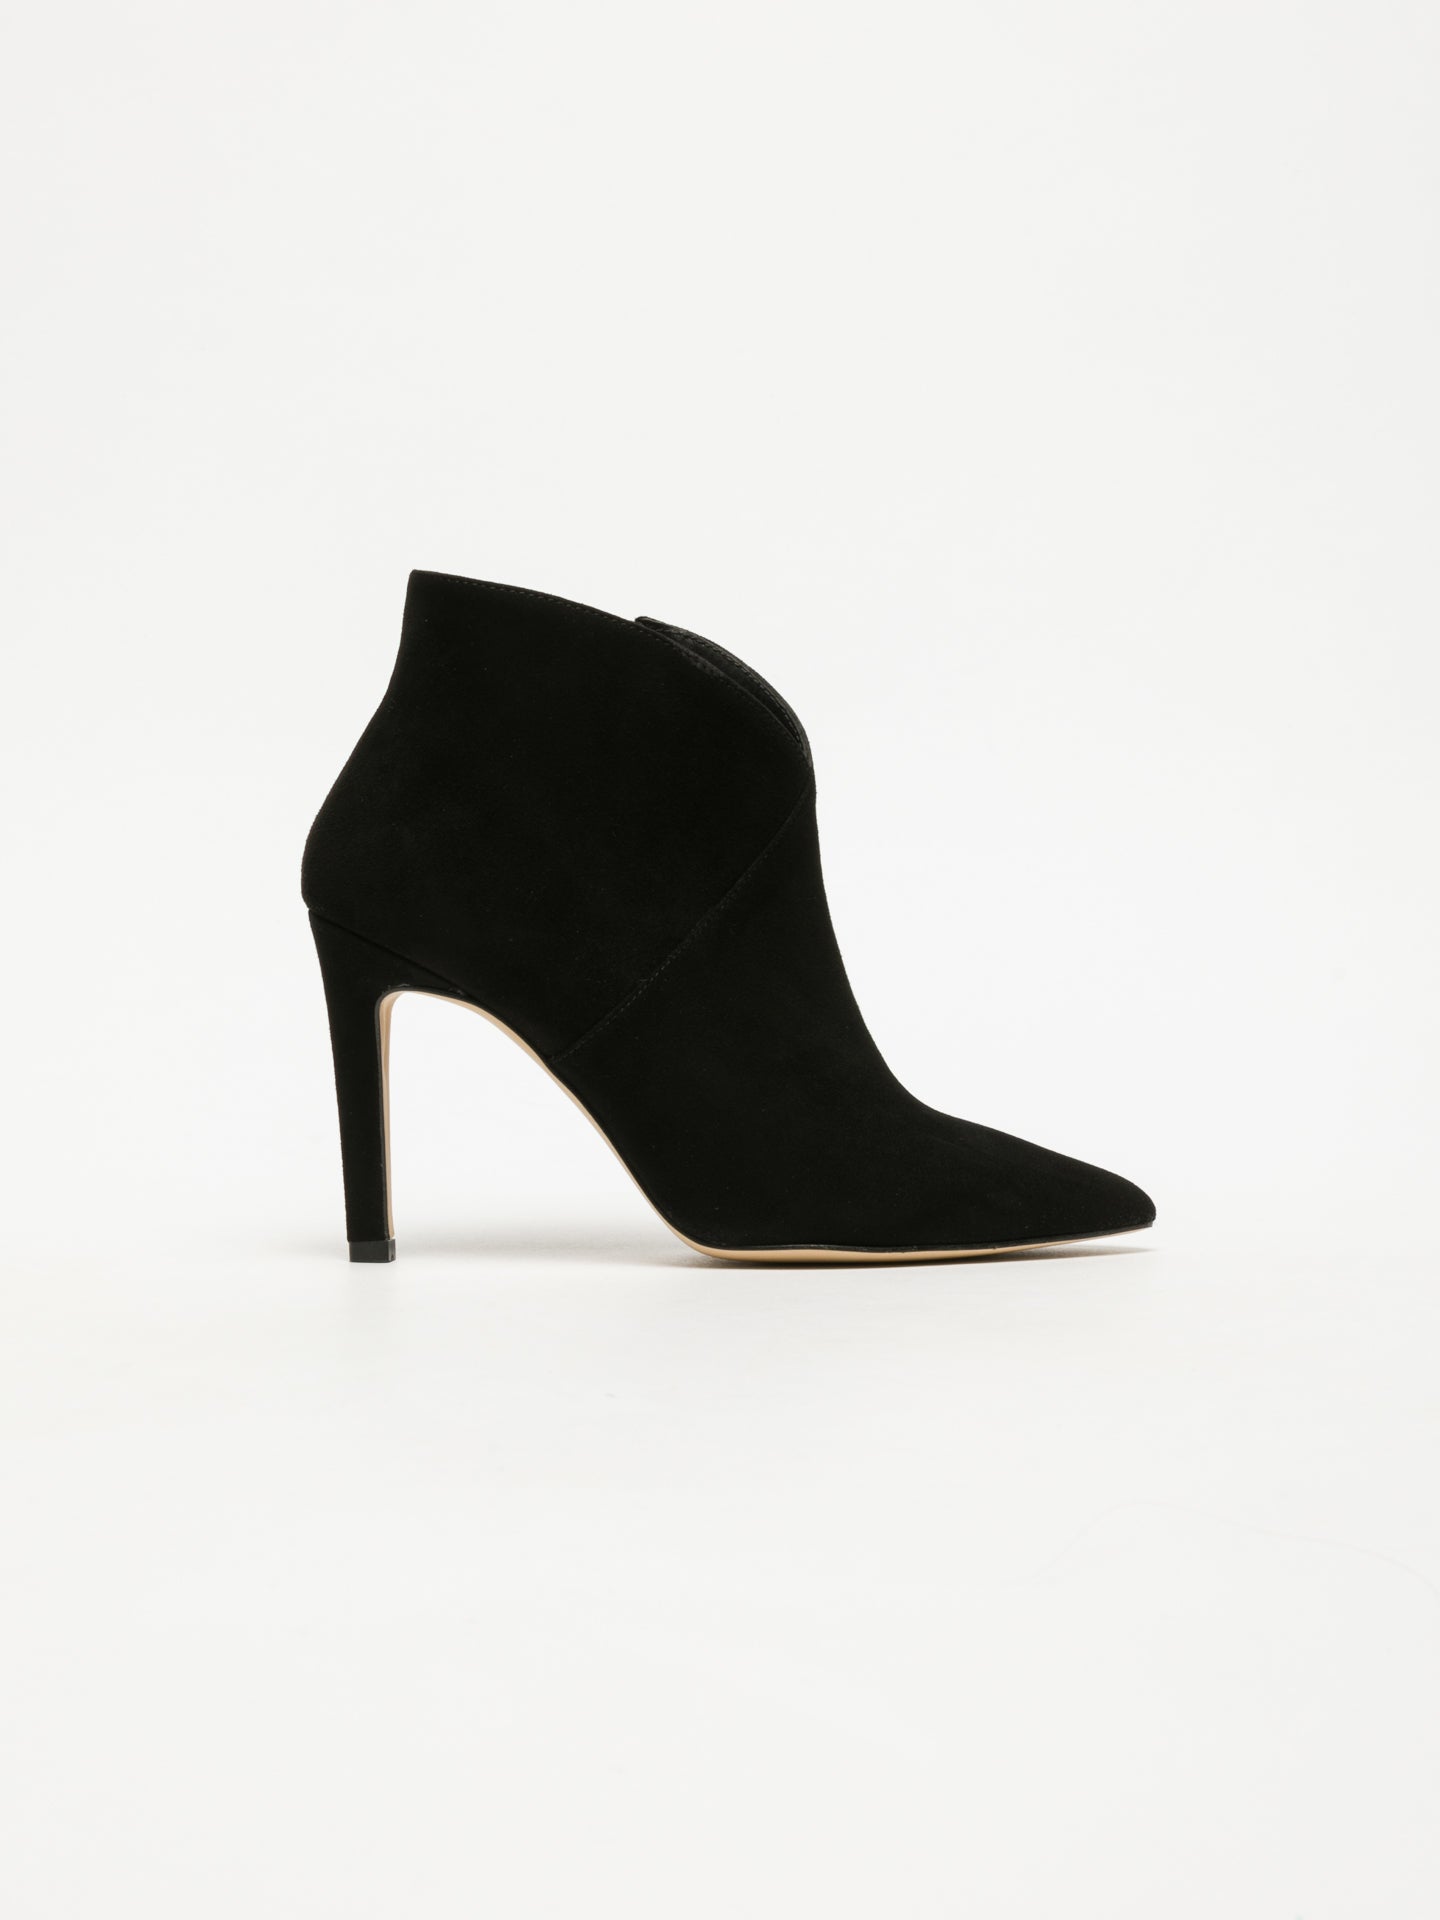 Sofia Costa Black Pointed Toe Ankle Boots